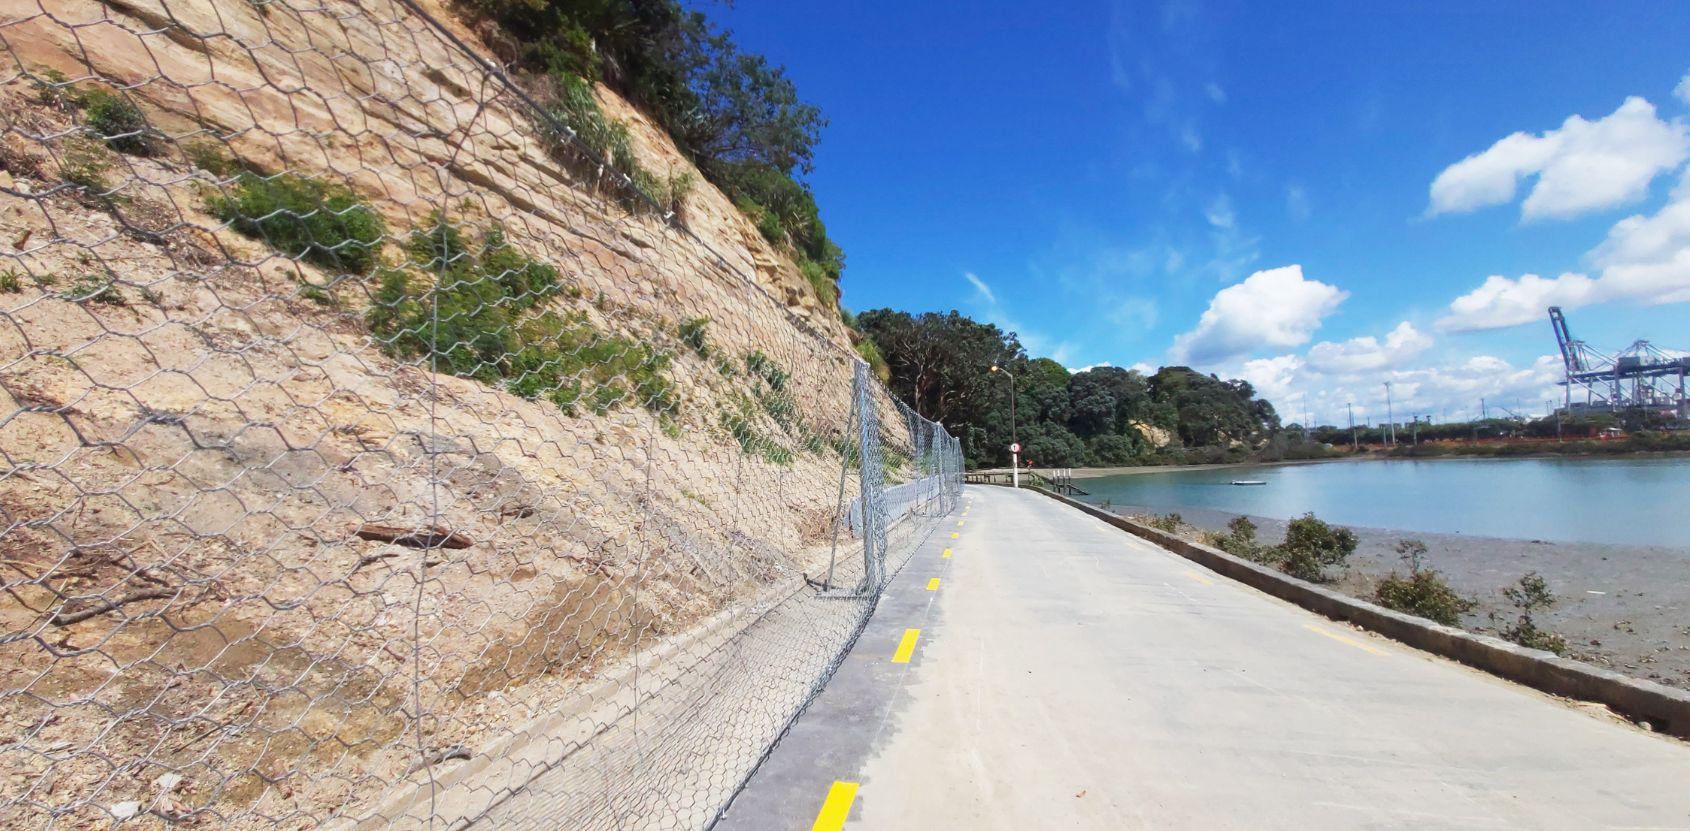 protecting-parnell-bath-access-road-with-maccaferri-rockfall-barriers-case-study-1690X831